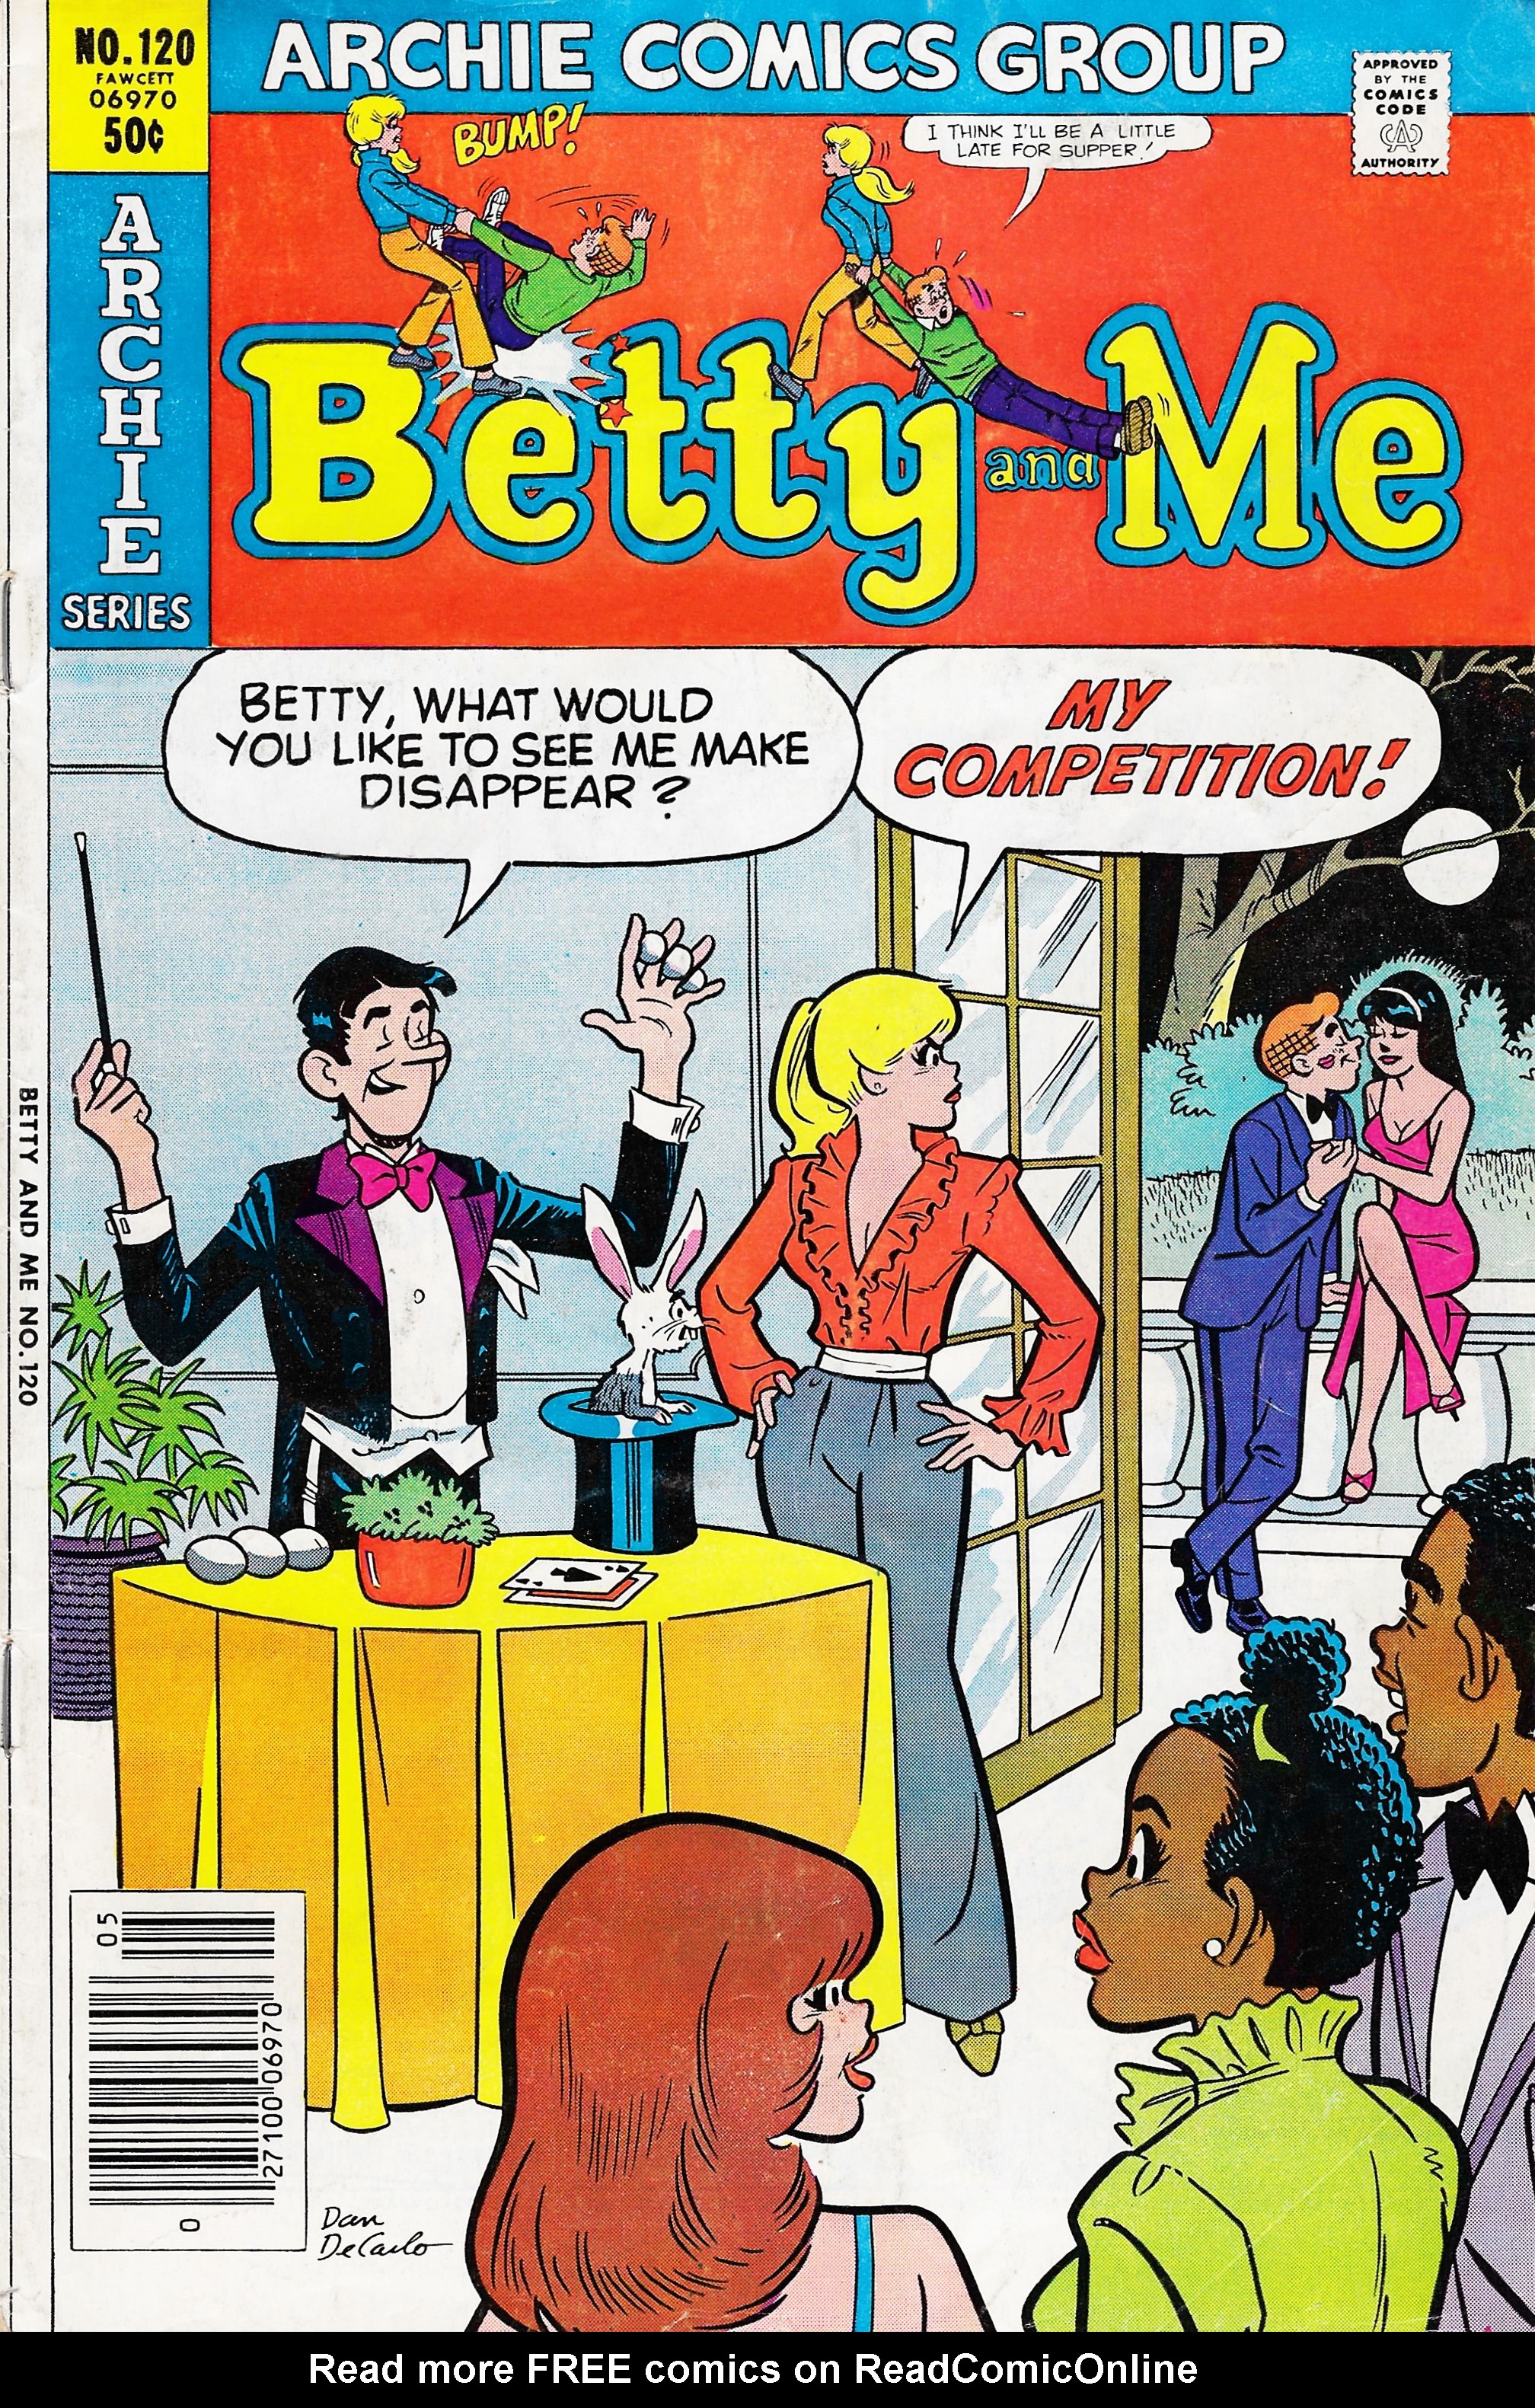 Read online Betty and Me comic -  Issue #120 - 1